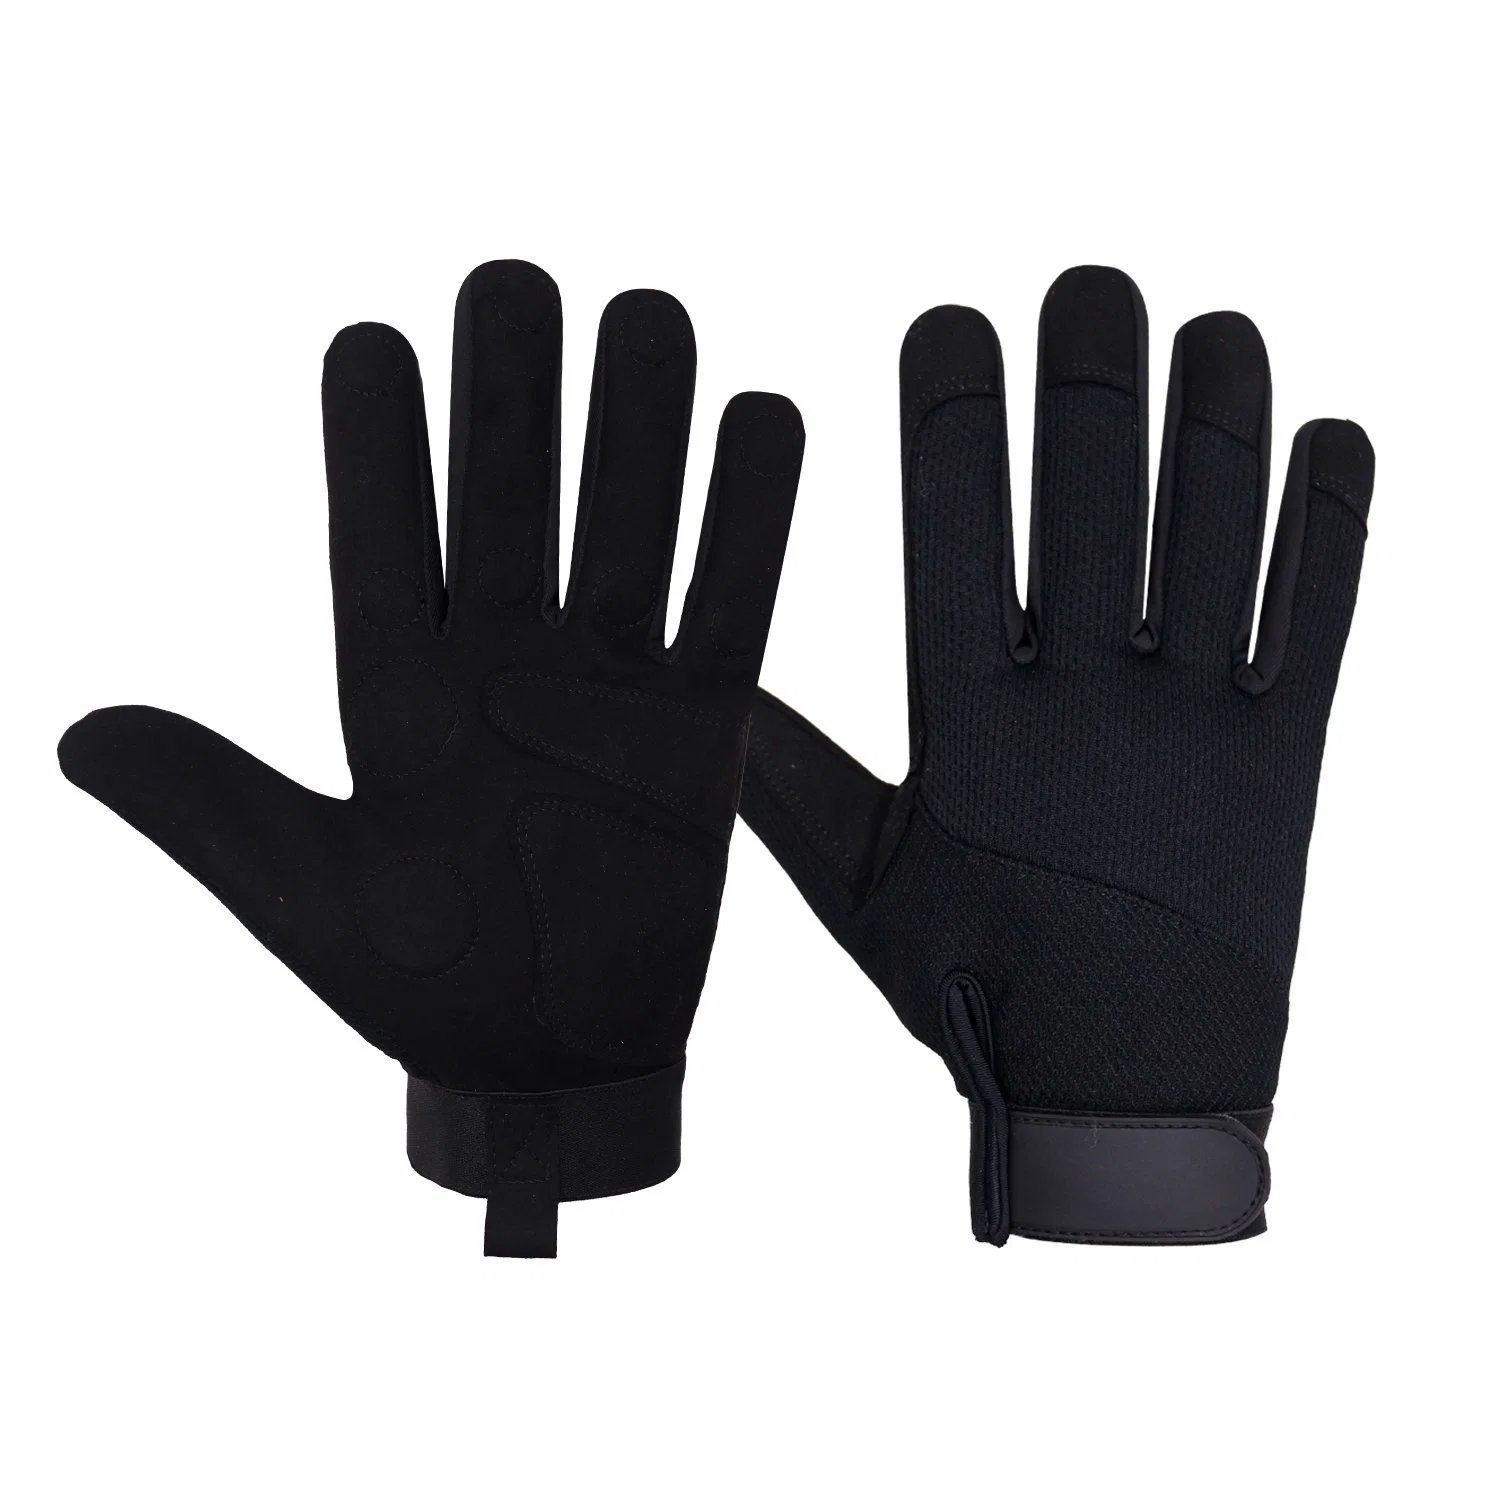 Prisafety Breathable New Design Black Mechanic Hand Gloves Safety Outdoor Work Magnetic Gloves Mens Work Glove with Magnet